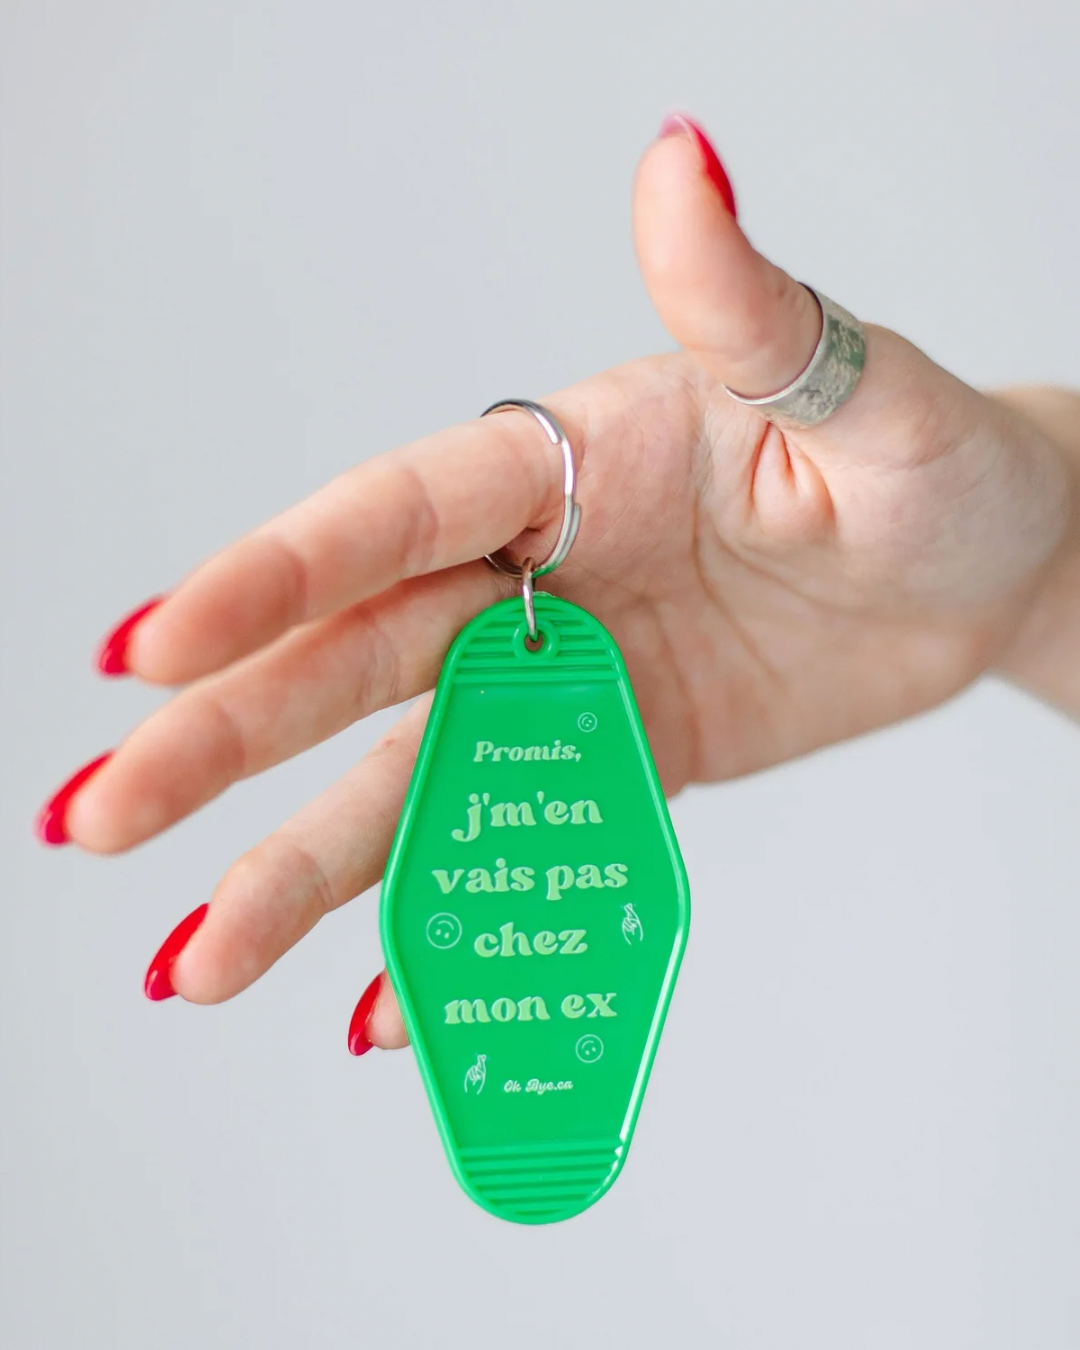 Fausse promesse - Keychain